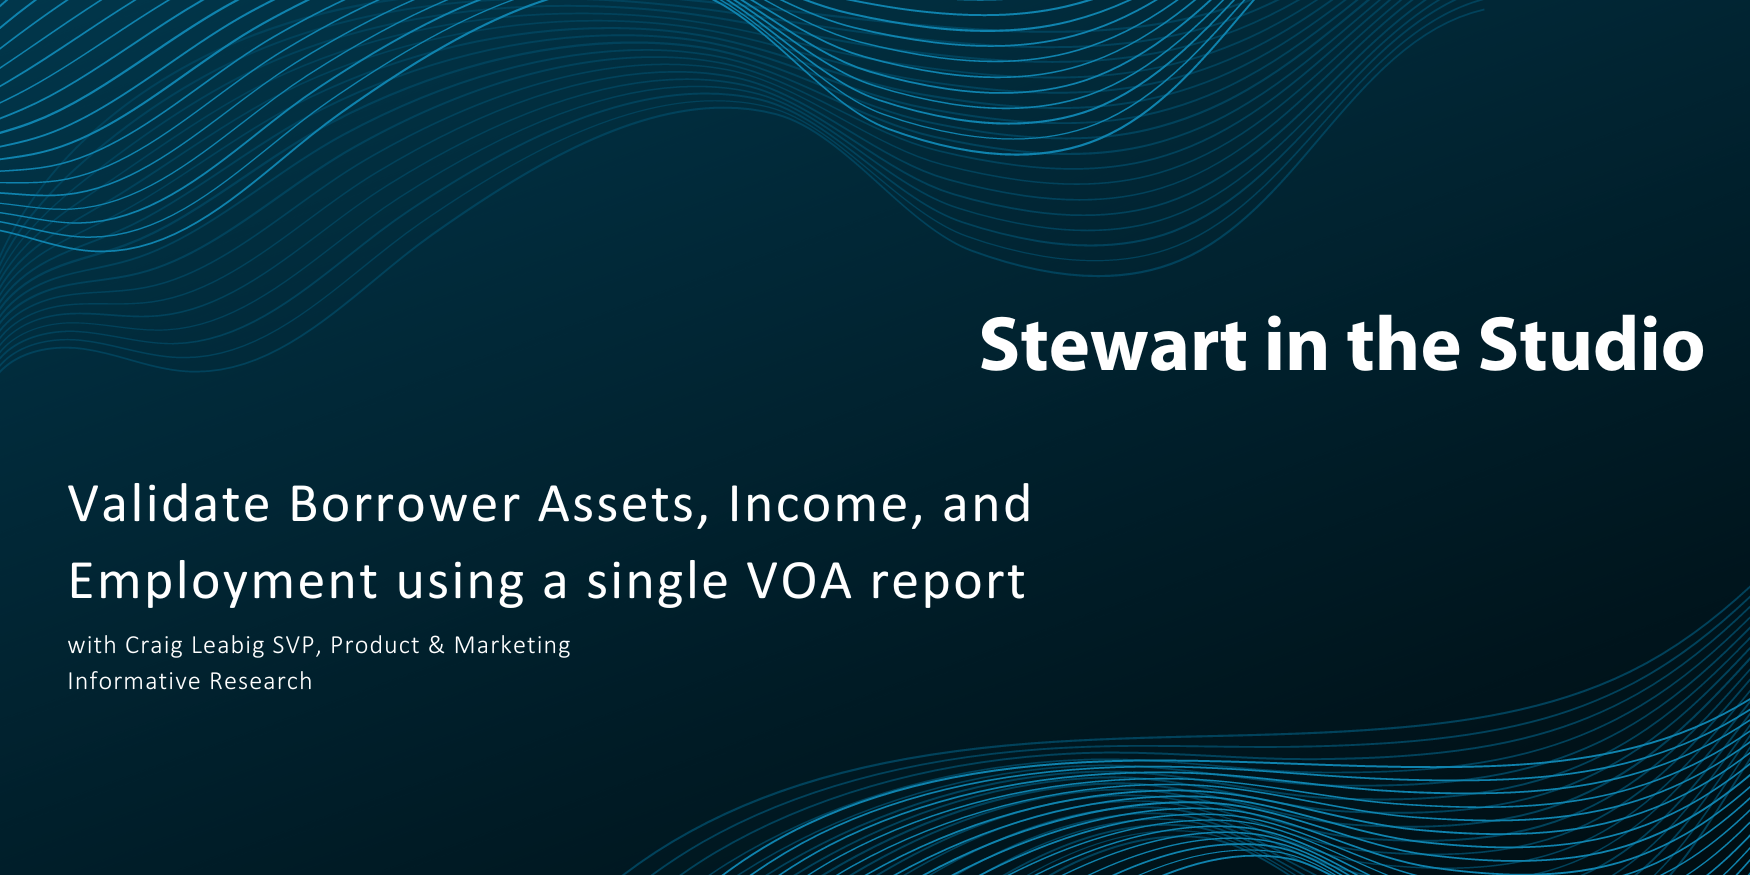 Validate Borrower Assets, Income, and Employment using a single VOA report